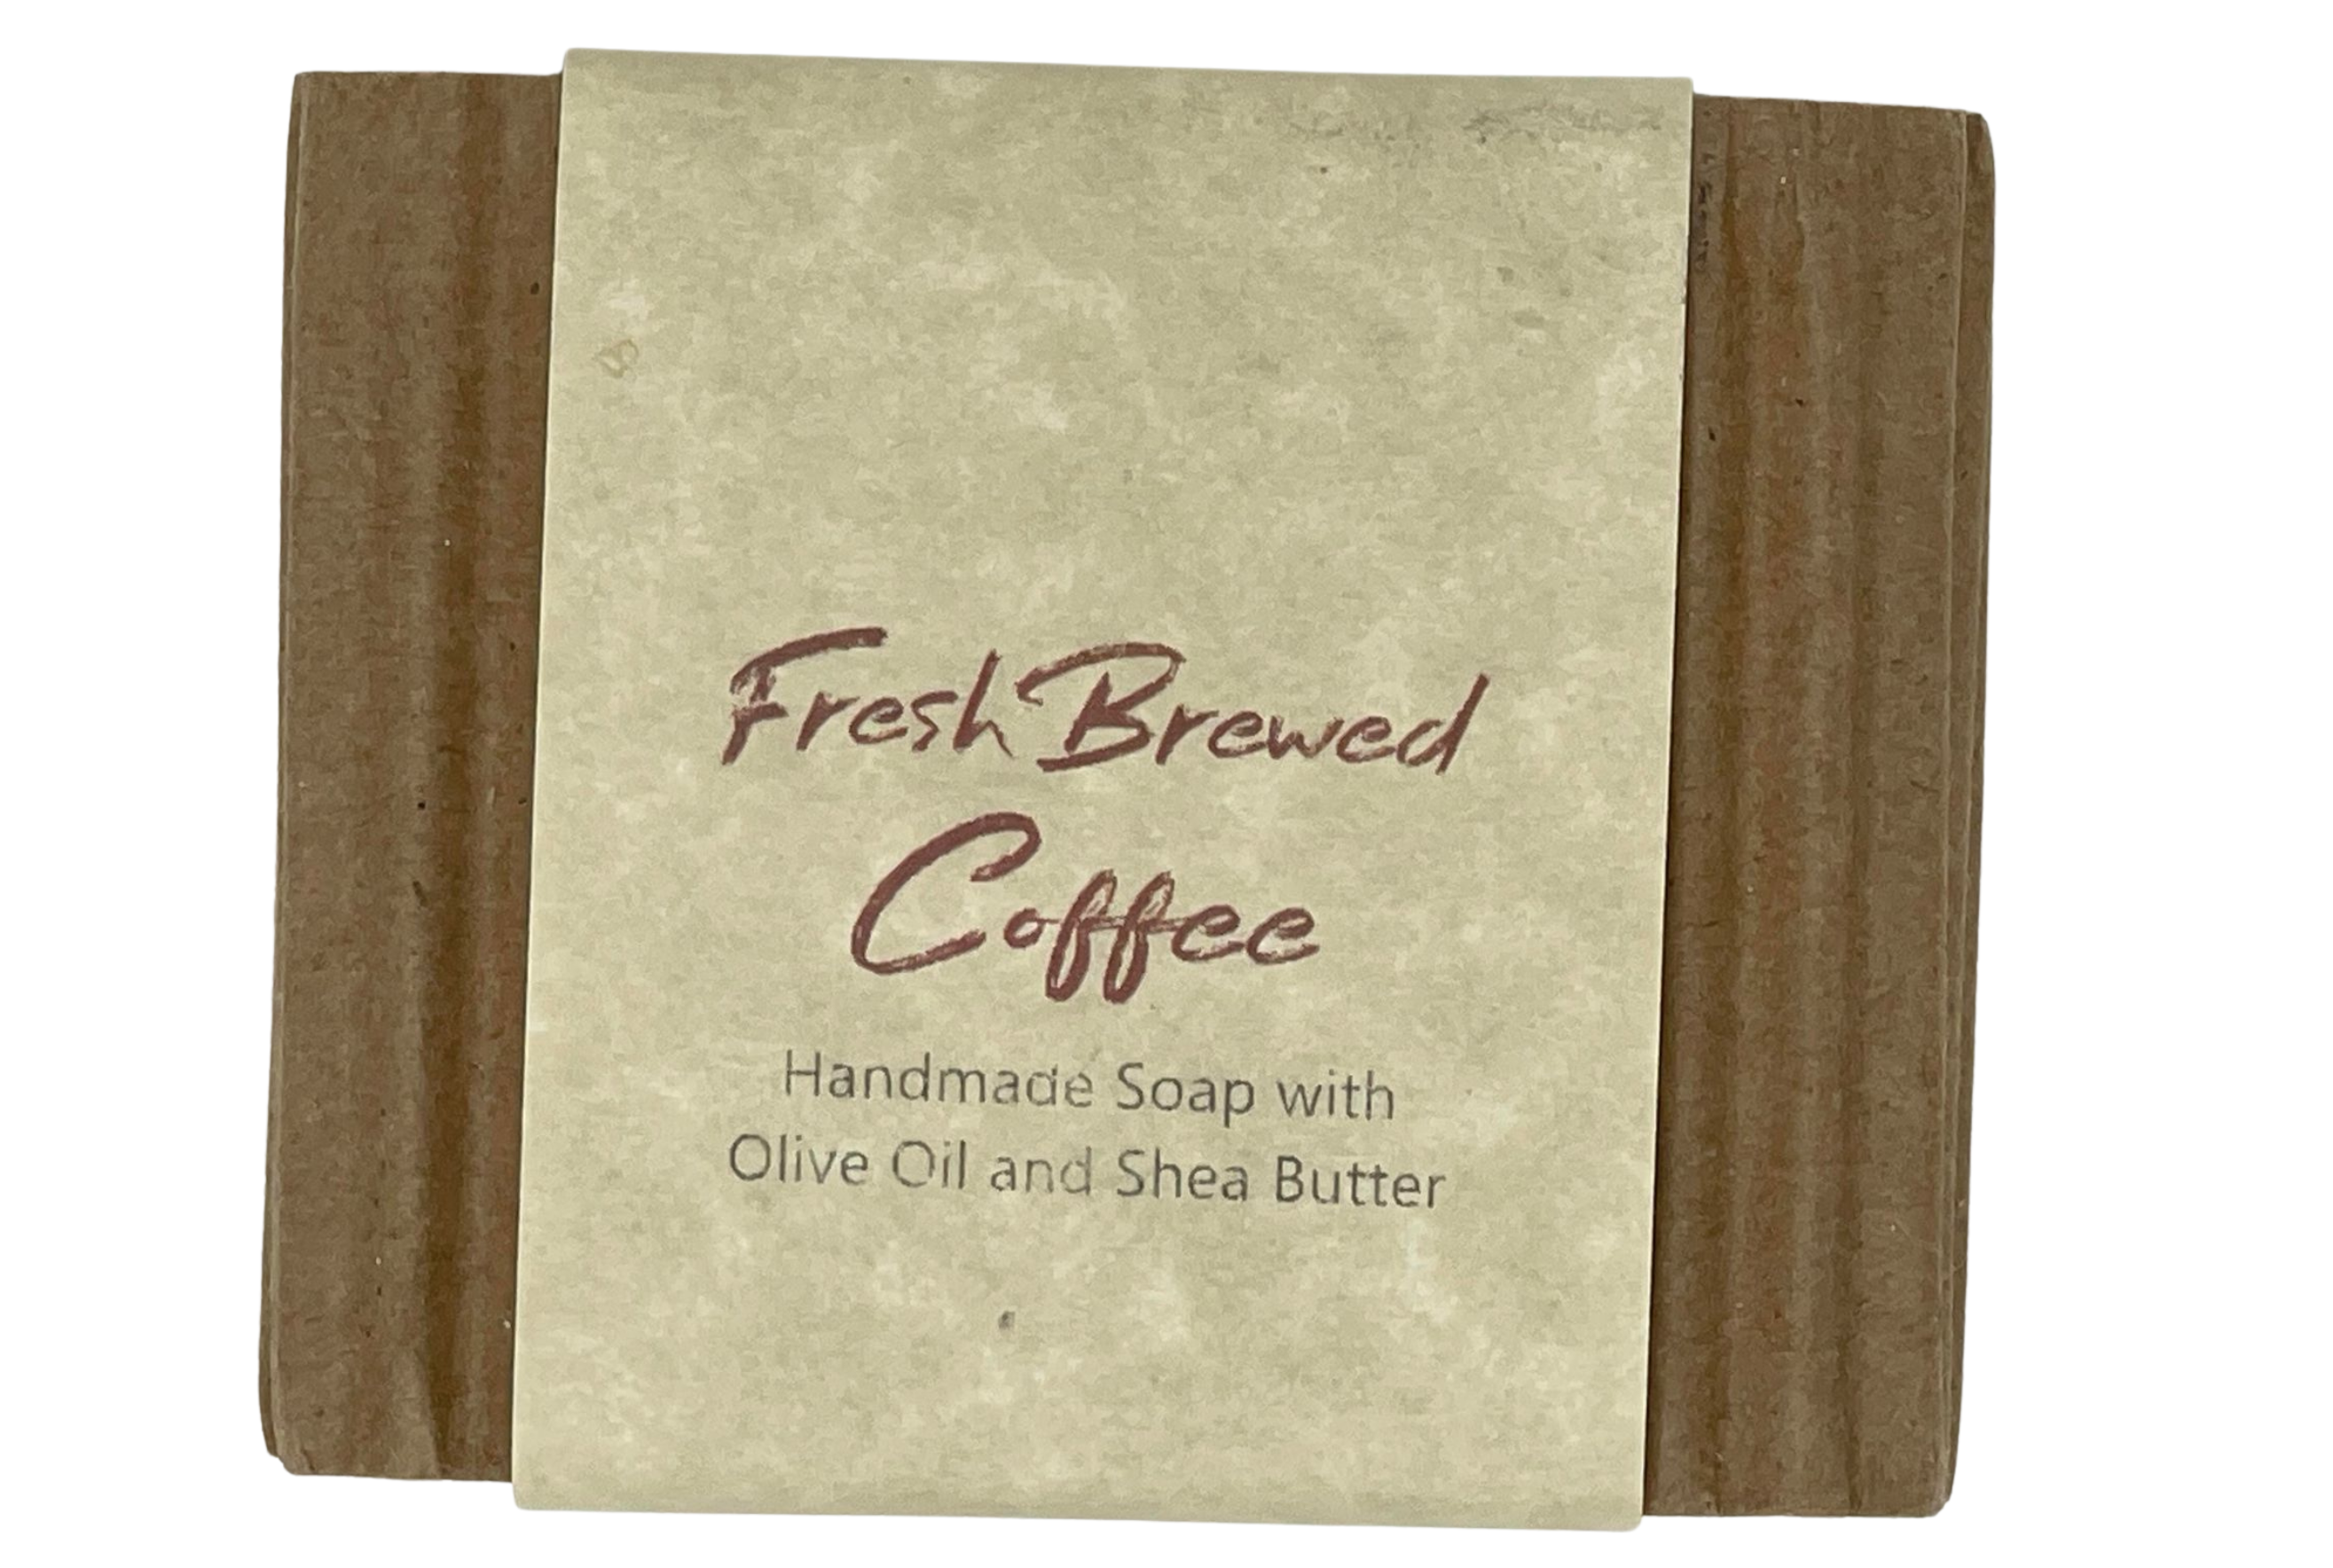 Fresh Brewed Coffee Goat Milk Handmade Soap Bar and Bath Bomb with Olive Oil & Shea Butter For Body, Face and Hands (4 Oz One Bar Soap + 4.5 Oz One Bath Bomb)